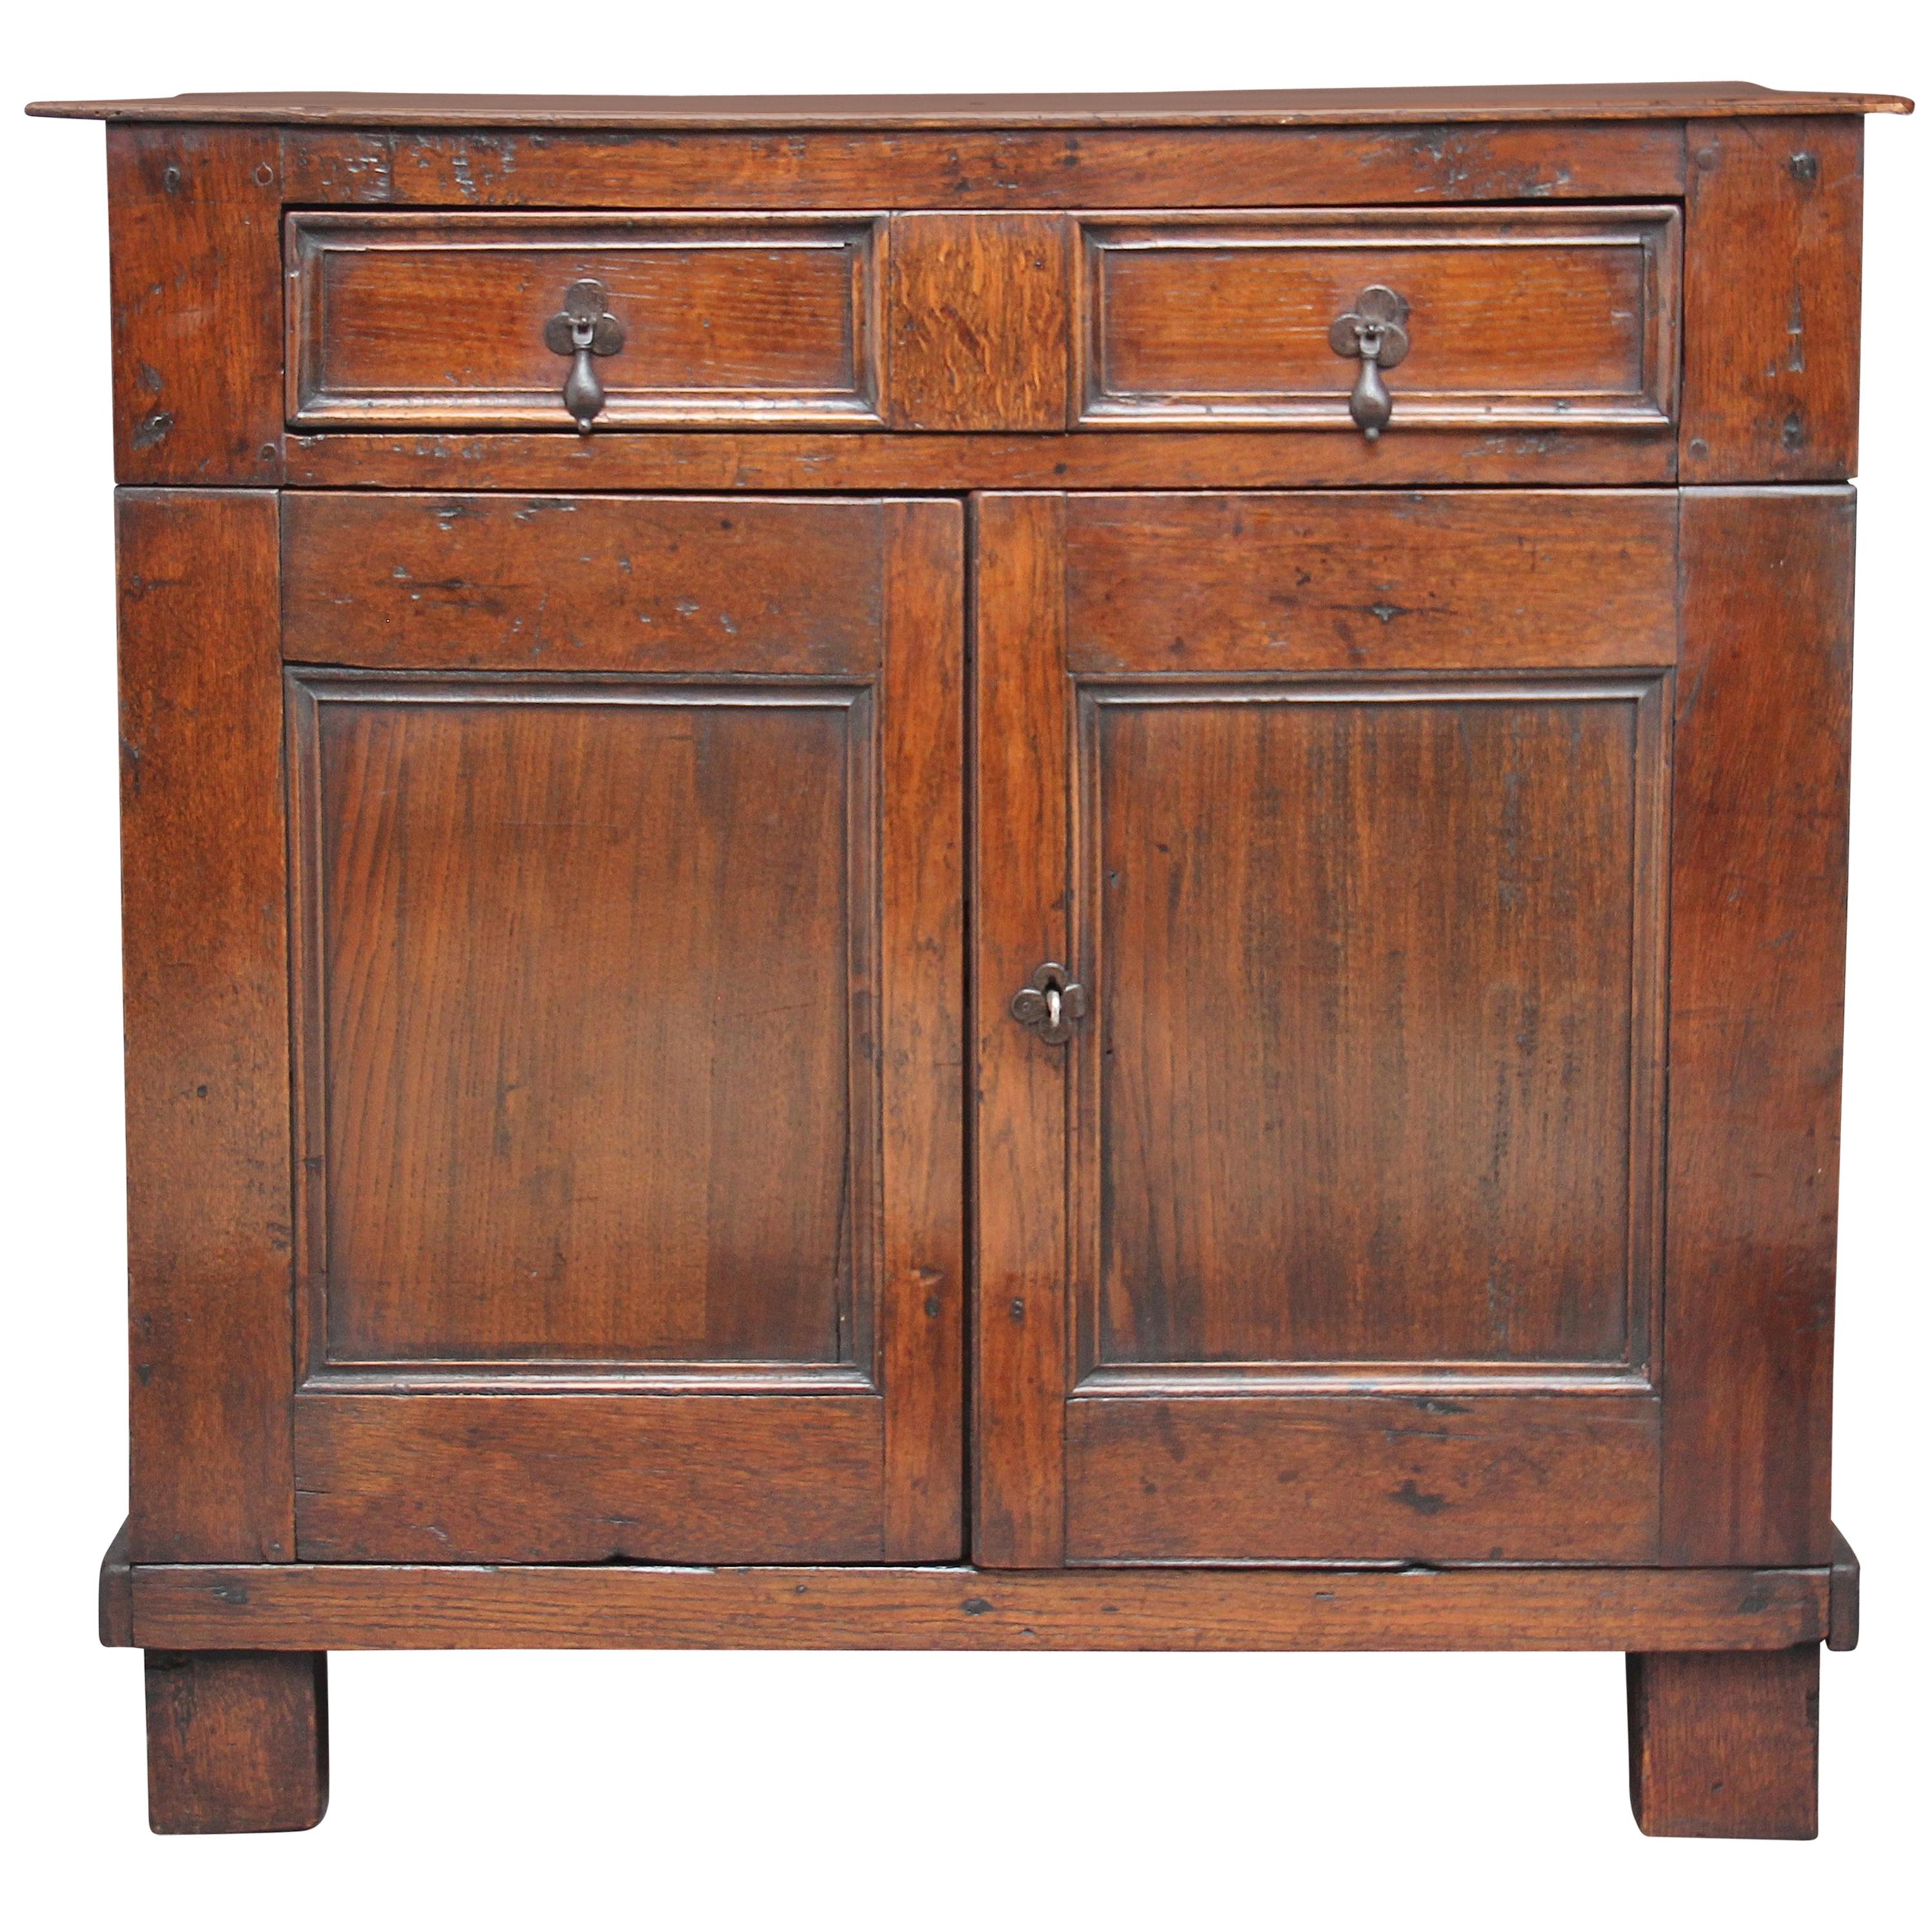 Early 18th Century Oak Enclosed Chest